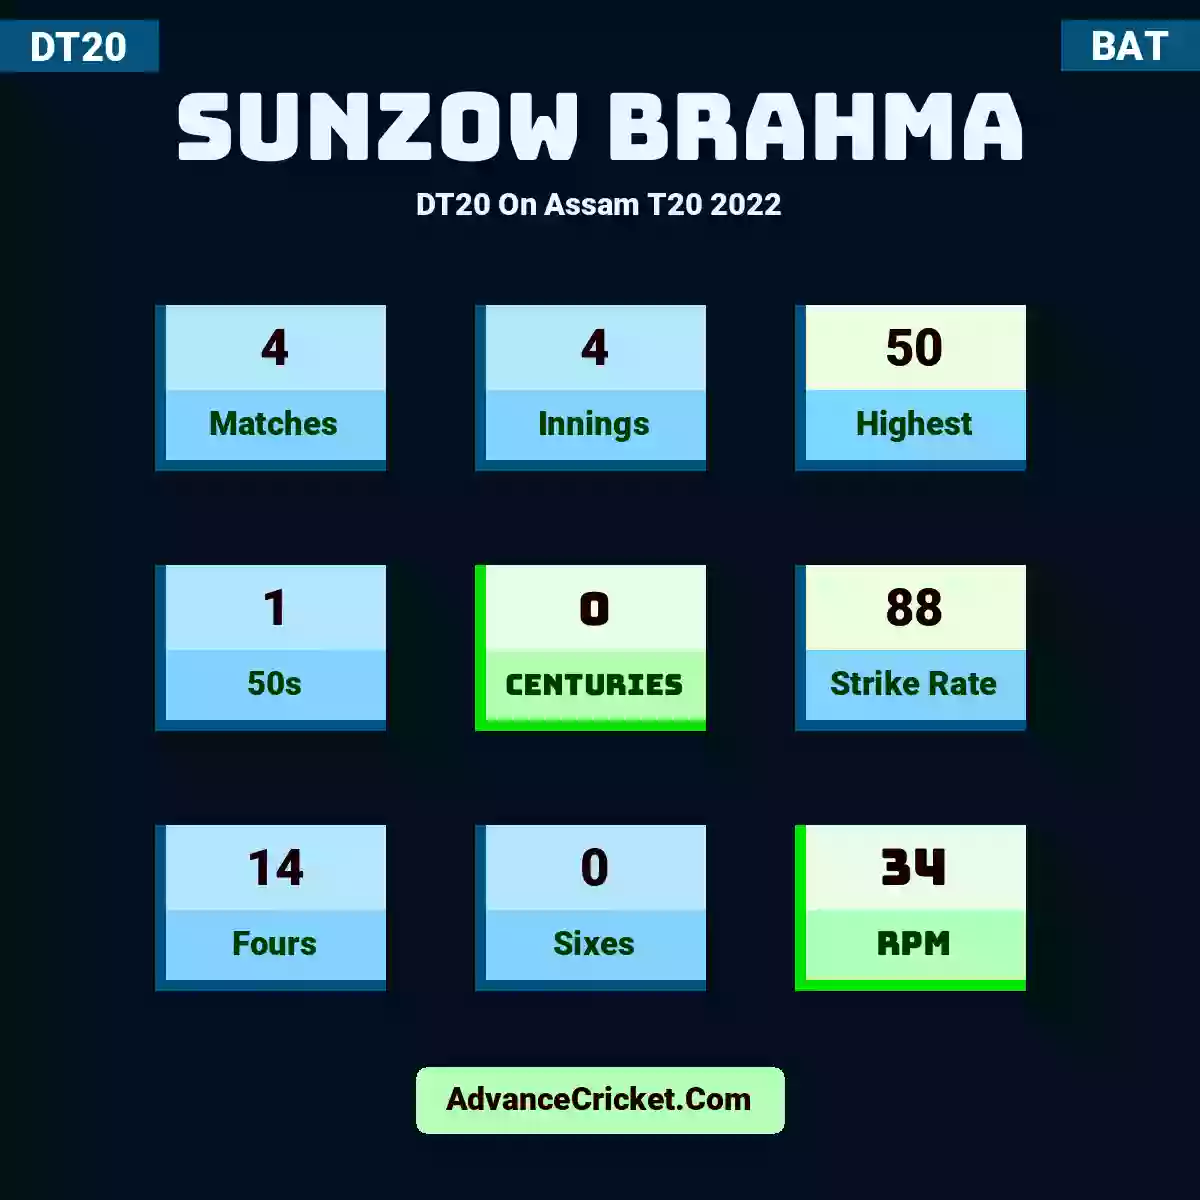 Sunzow Brahma DT20  On Assam T20 2022, Sunzow Brahma played 4 matches, scored 50 runs as highest, 1 half-centuries, and 0 centuries, with a strike rate of 88. S.Brahma hit 14 fours and 0 sixes, with an RPM of 34.